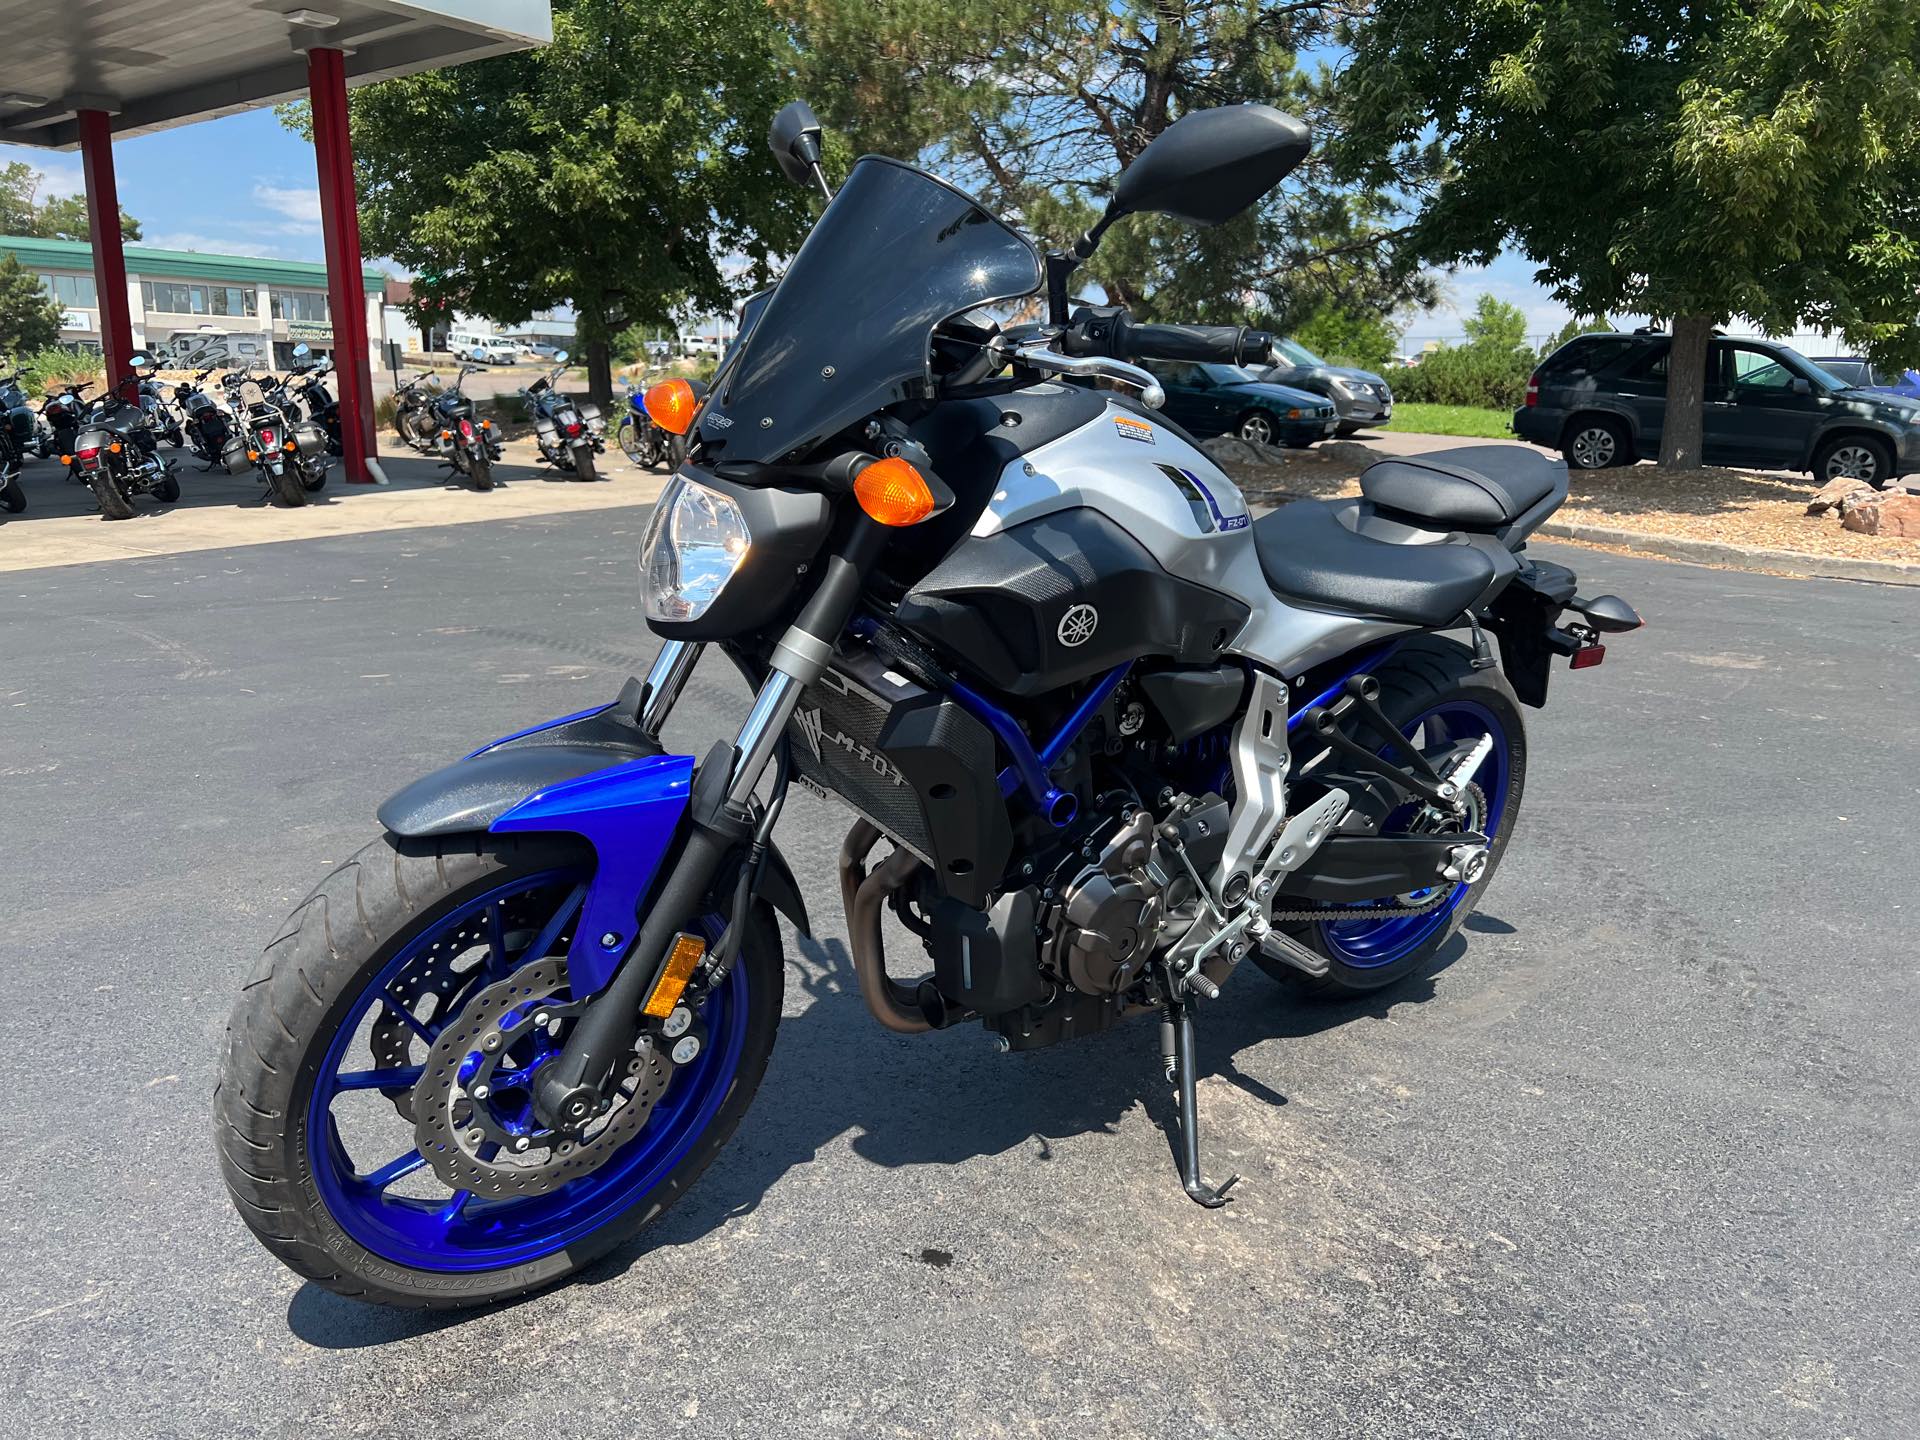 2016 Yamaha FZ 07 at Aces Motorcycles - Fort Collins